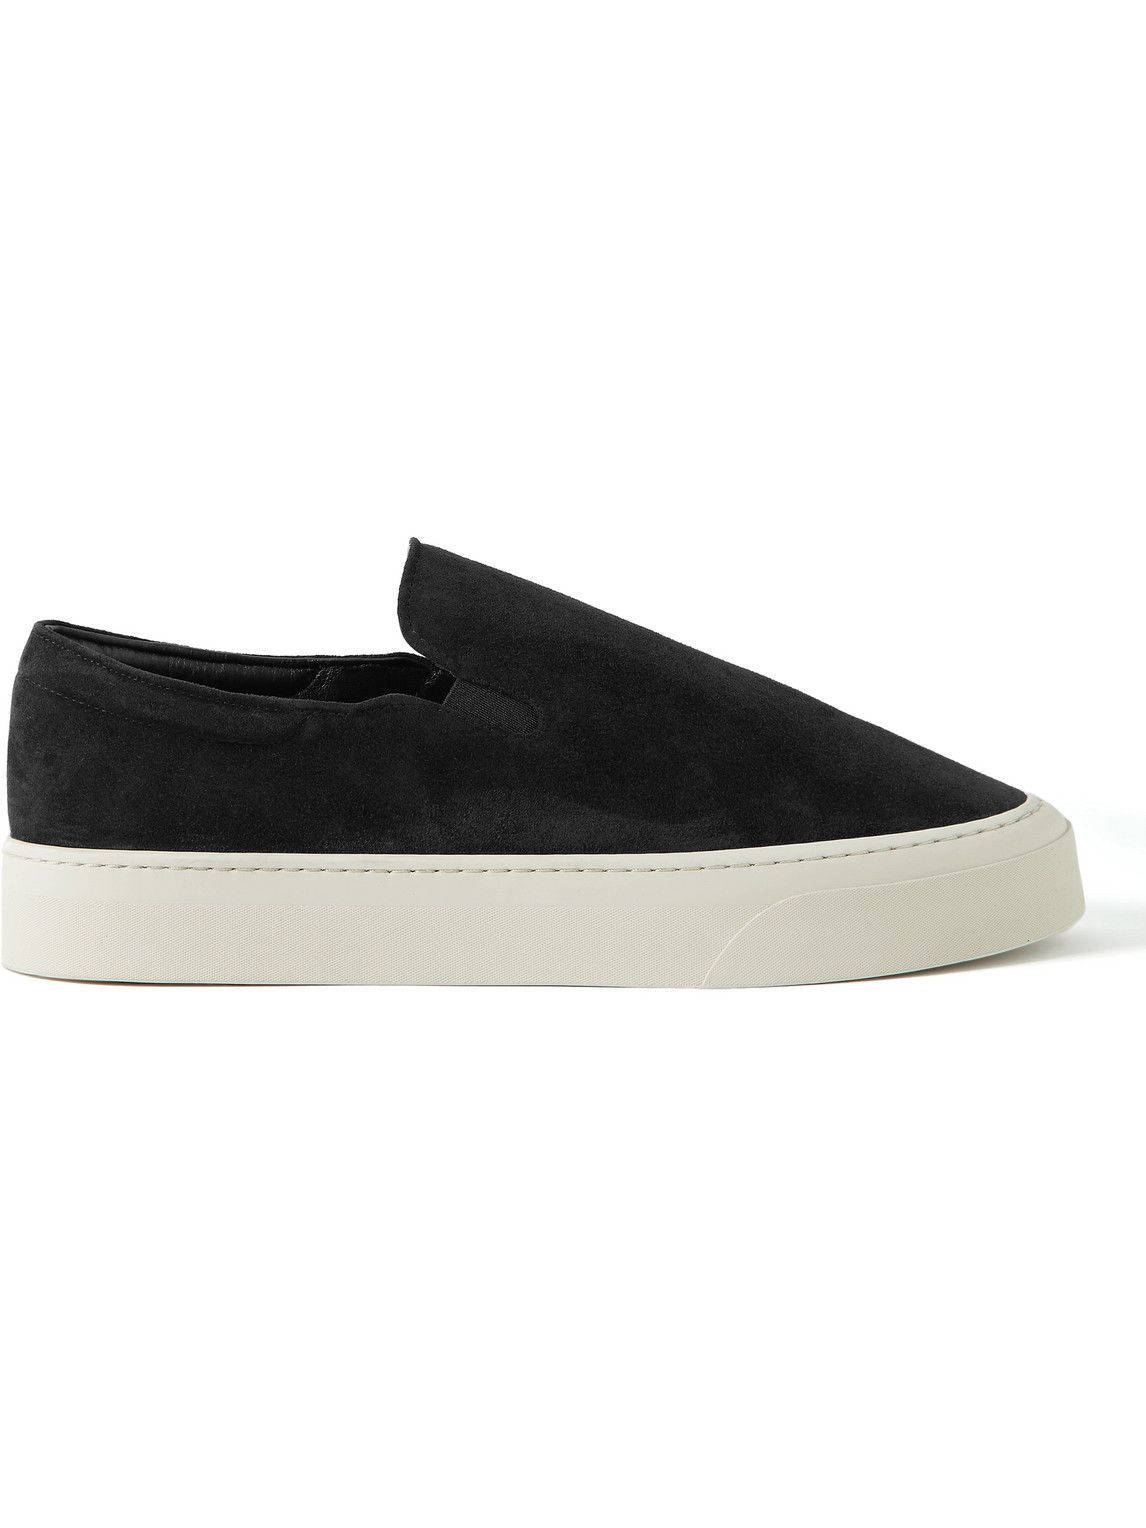 The Row - Dean Suede Slip-On Sneakers - Black The Row